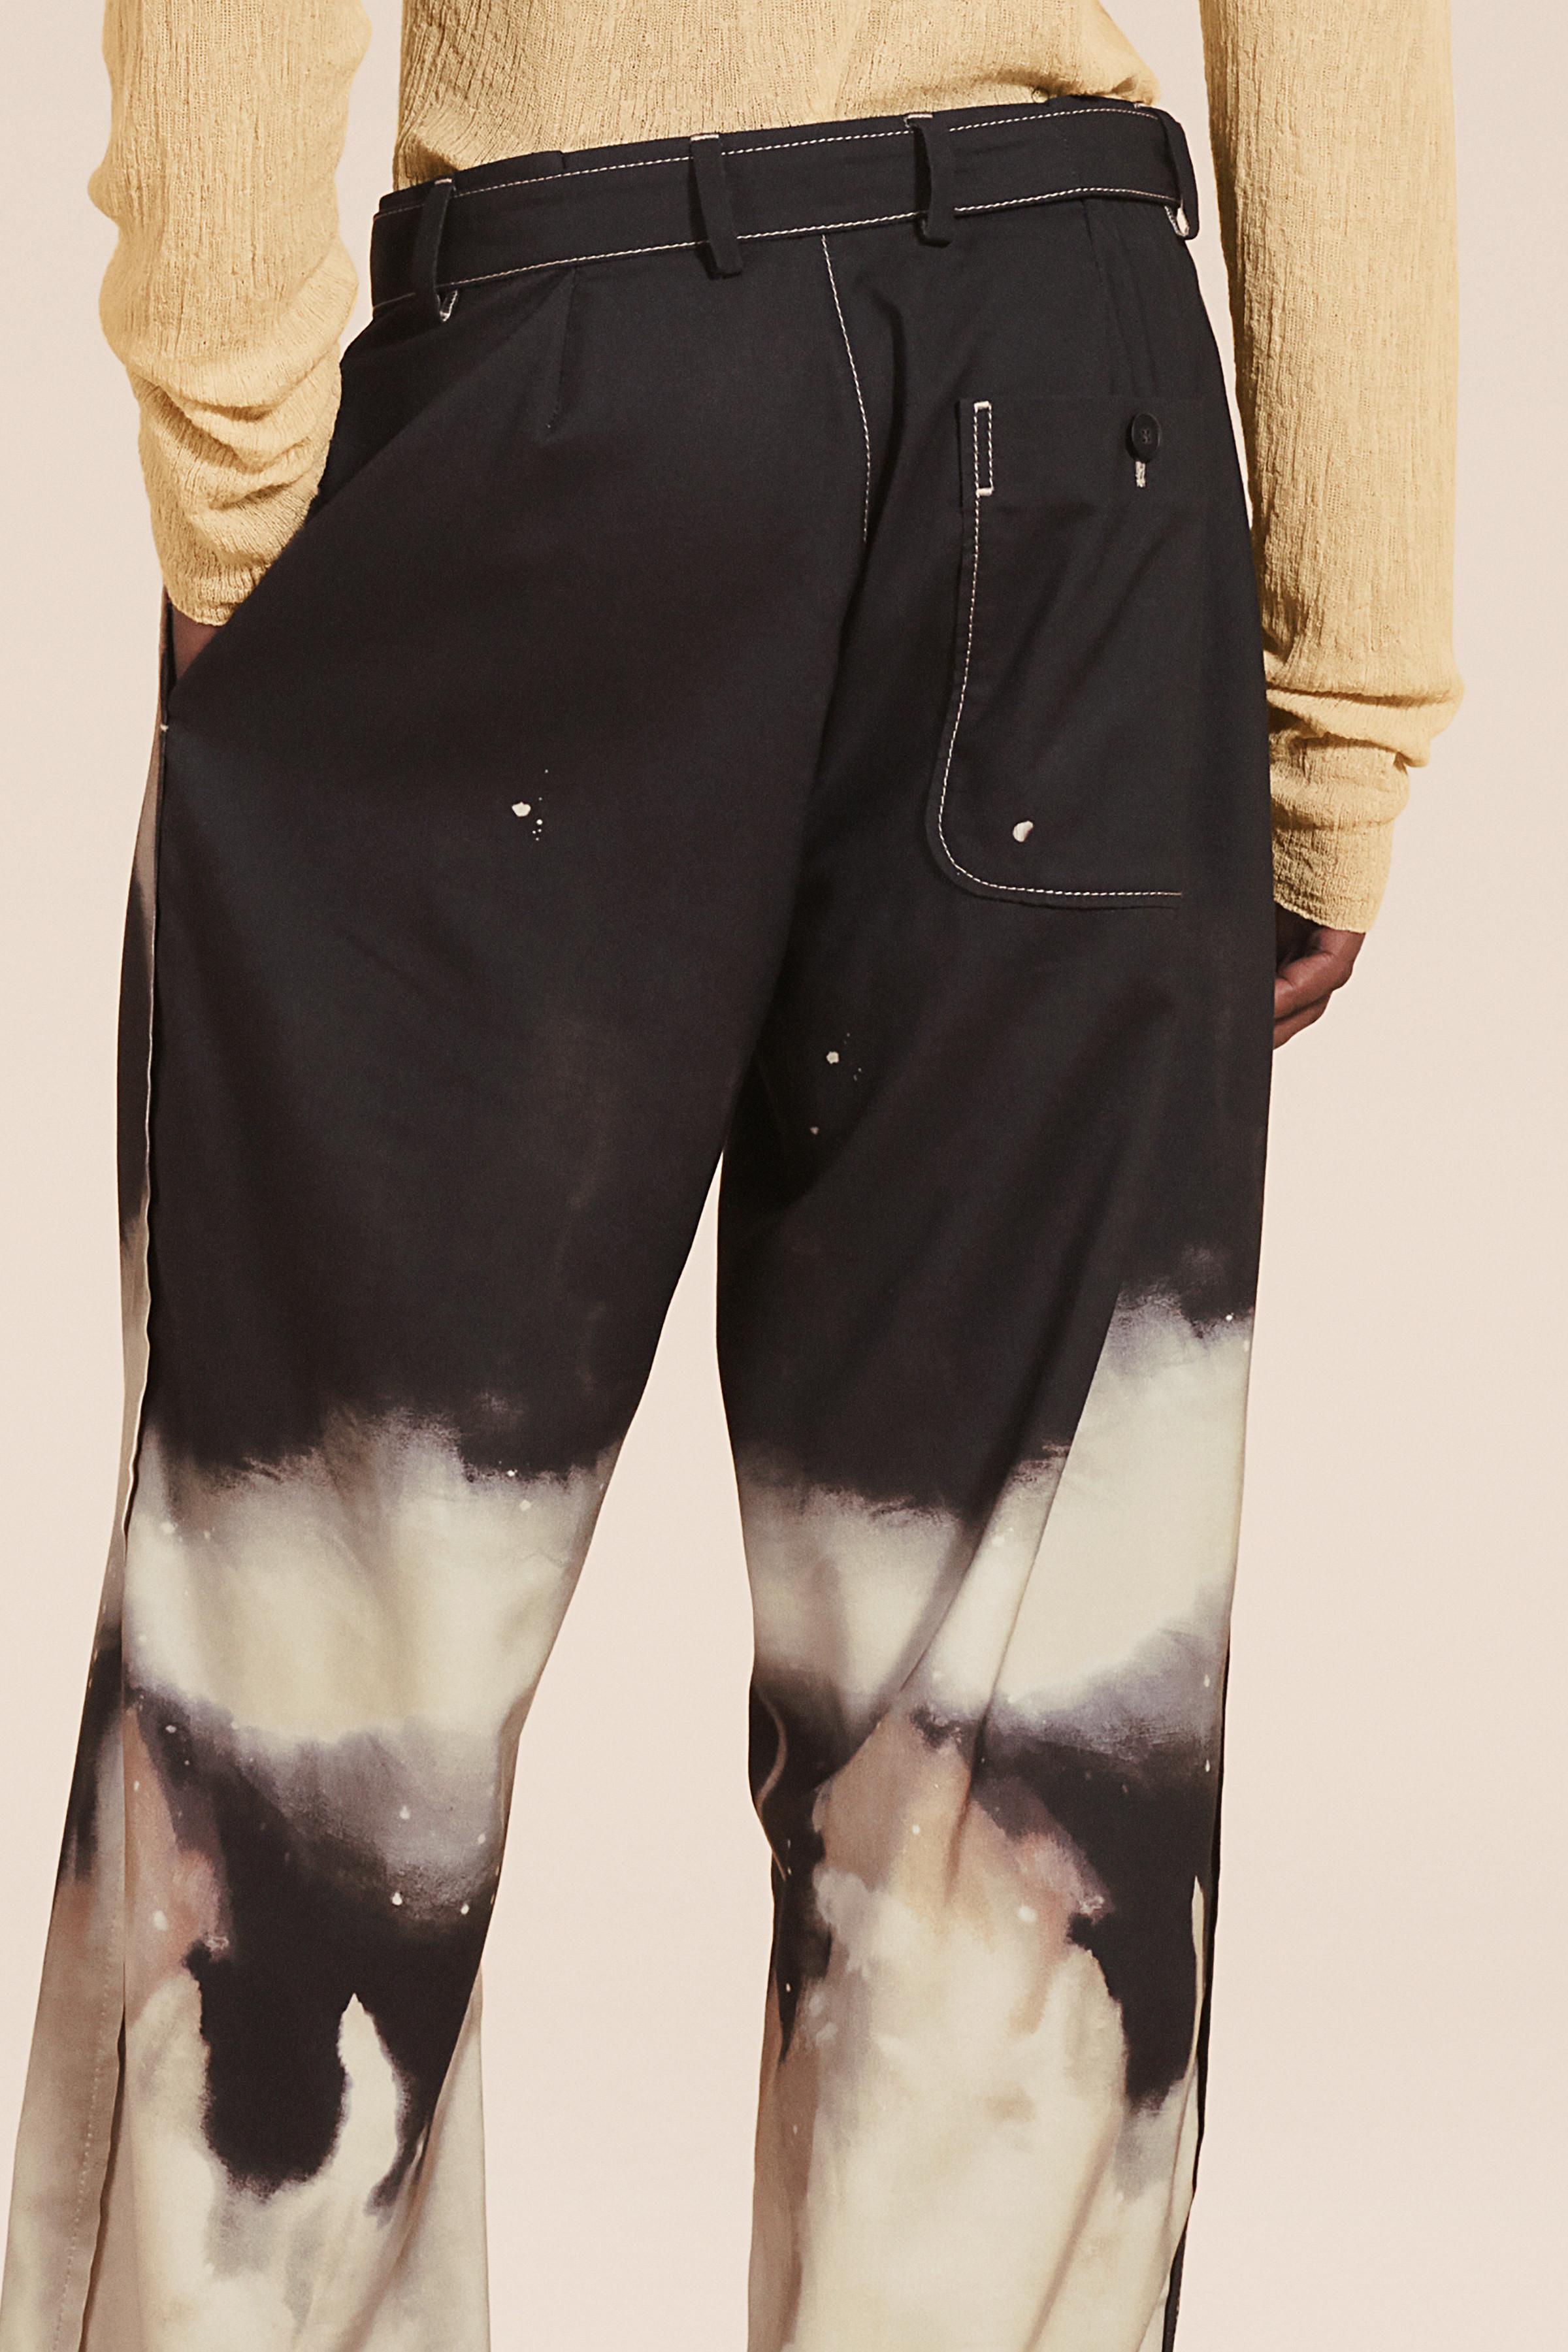 ZARA Printed Pants Black - $16 (20% Off Retail) New With Tags - From Edie